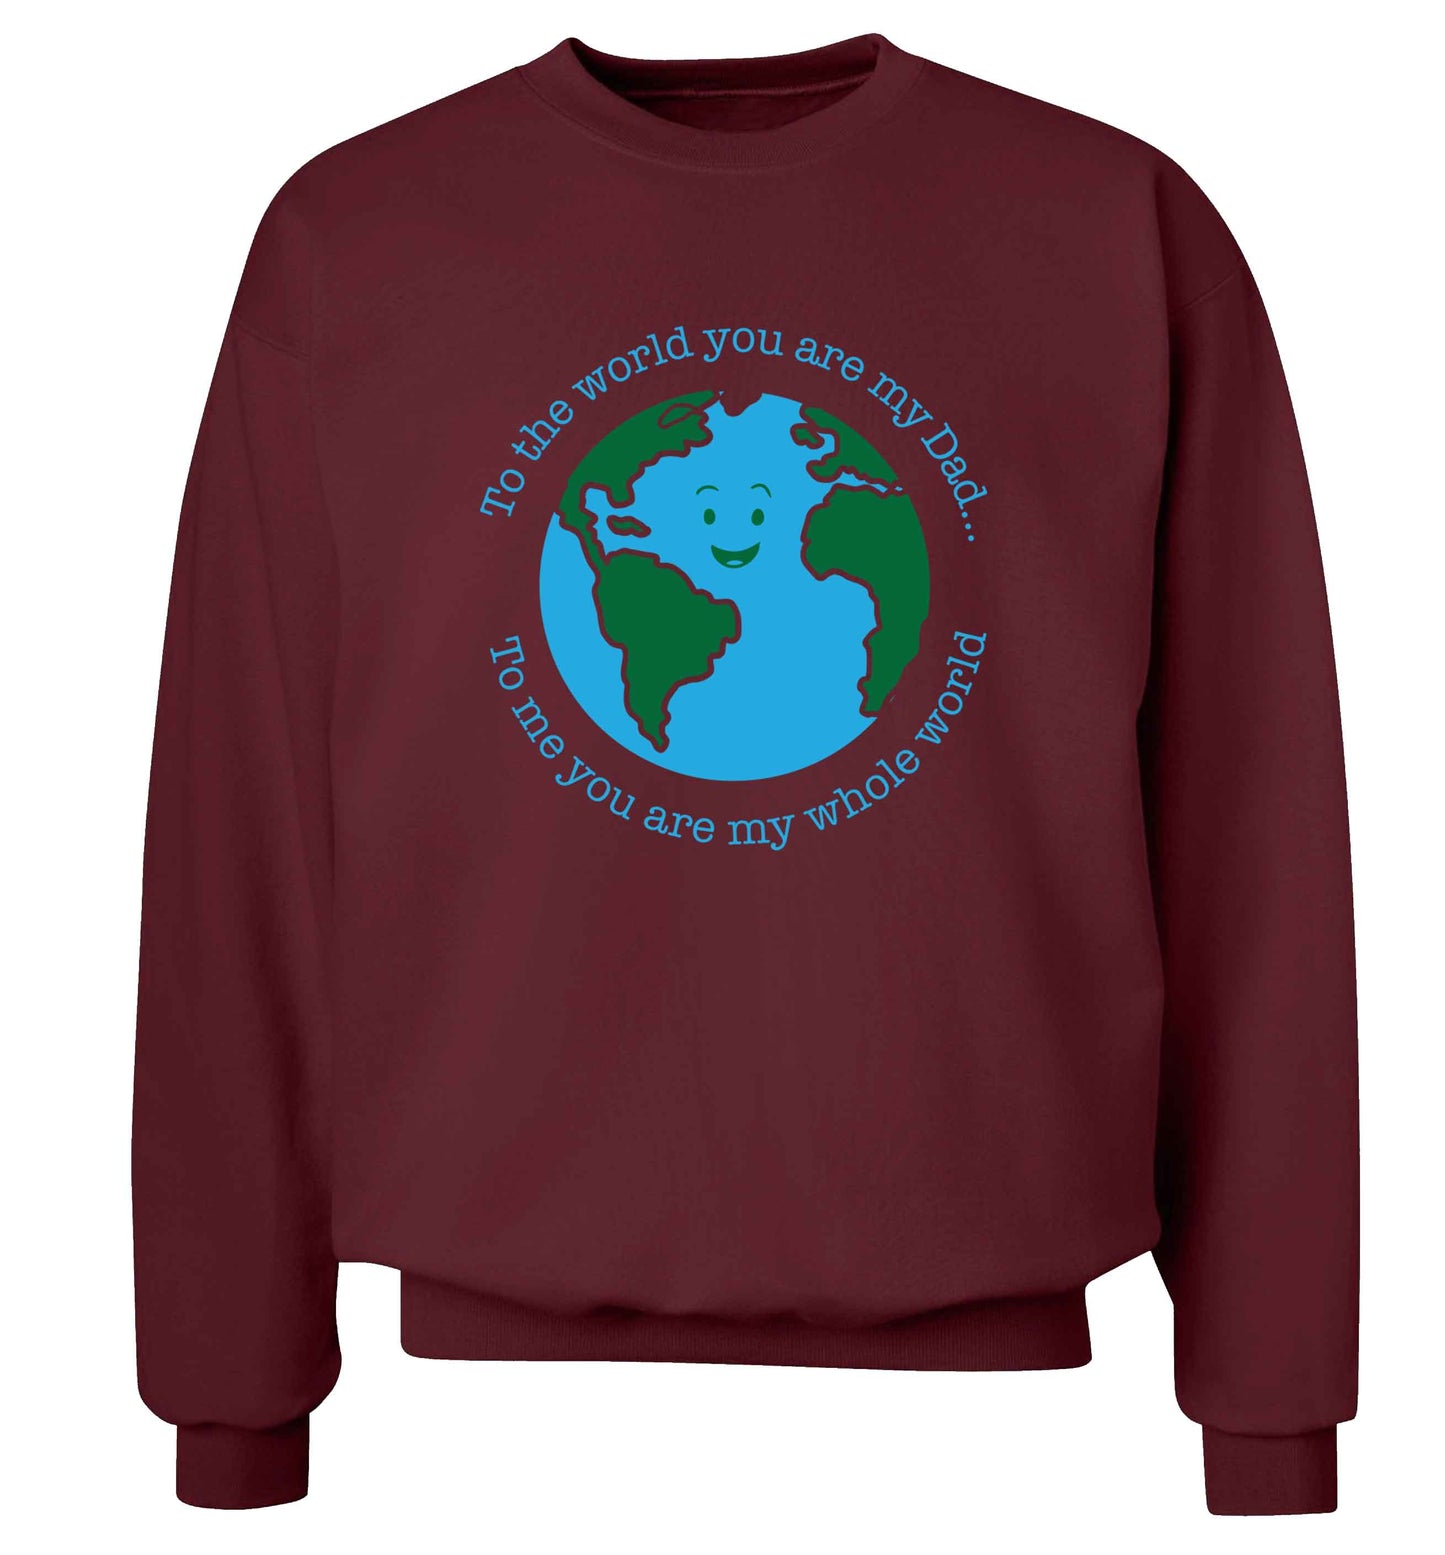 To the world you are my dad, to me you are my whole world adult's unisex maroon sweater 2XL